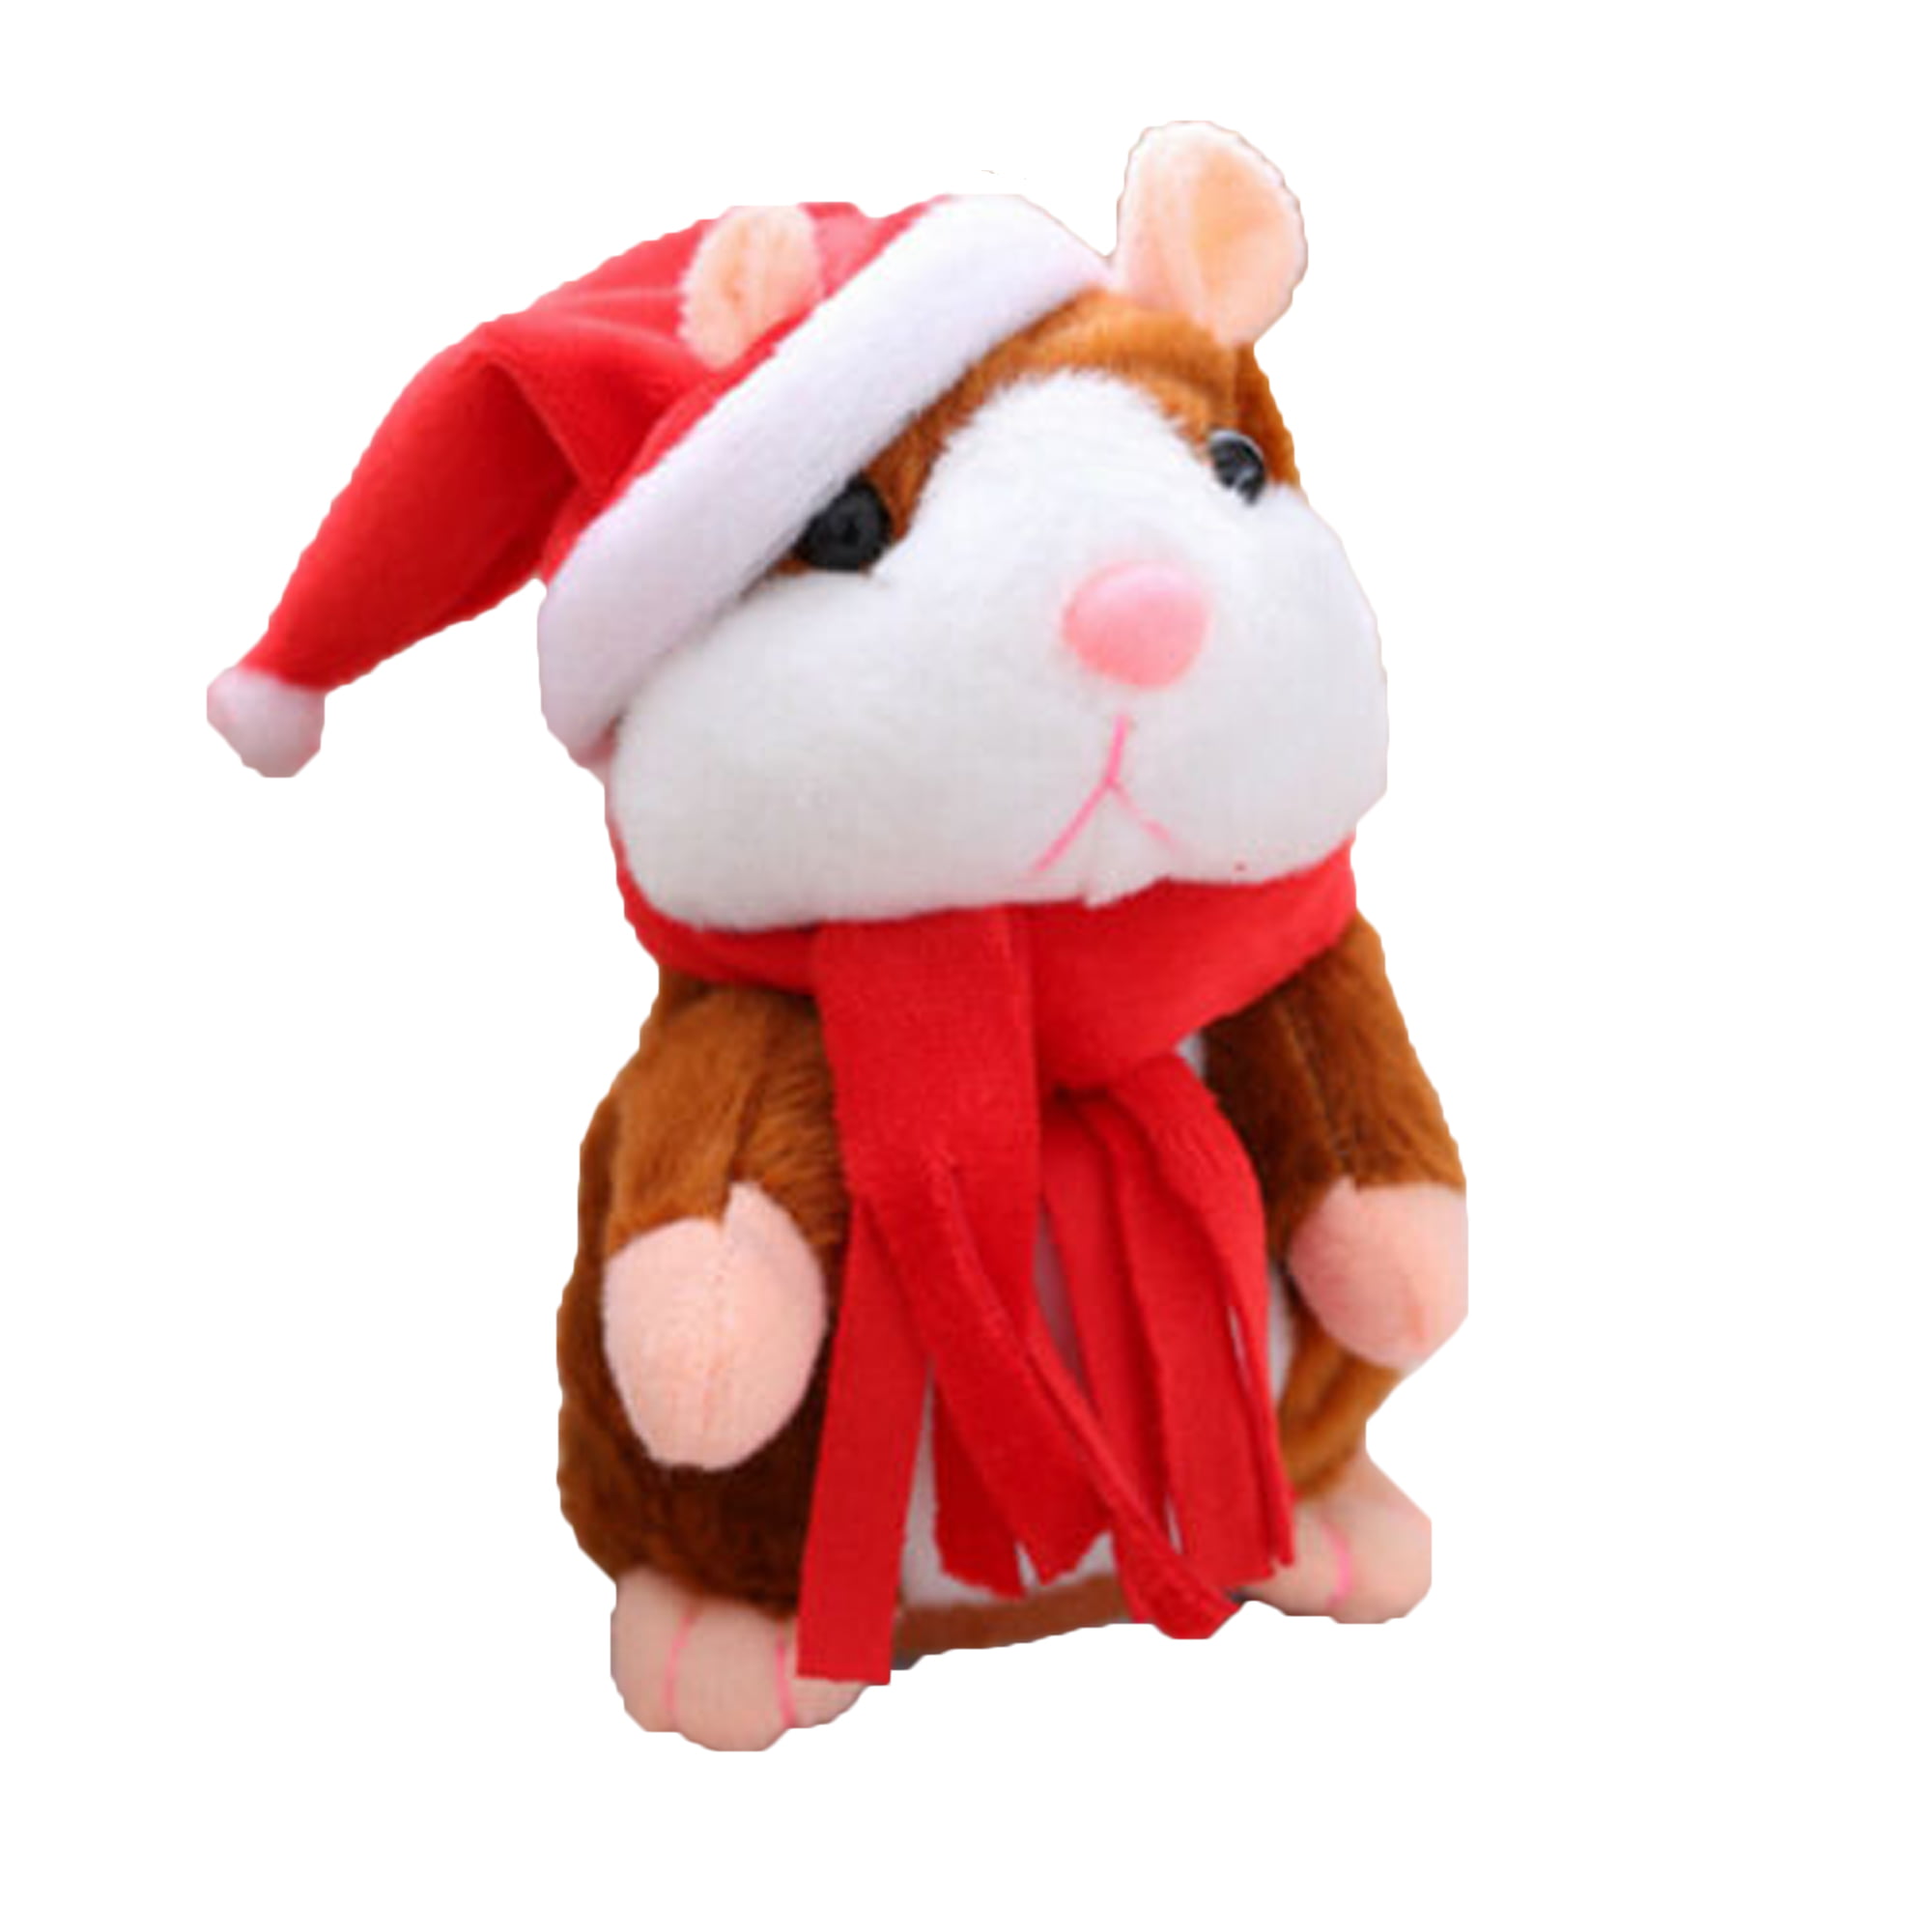 Cheeky Talking Hamster Mouse Pet Christmas Toy Speak Sound Record Hamster Gift 